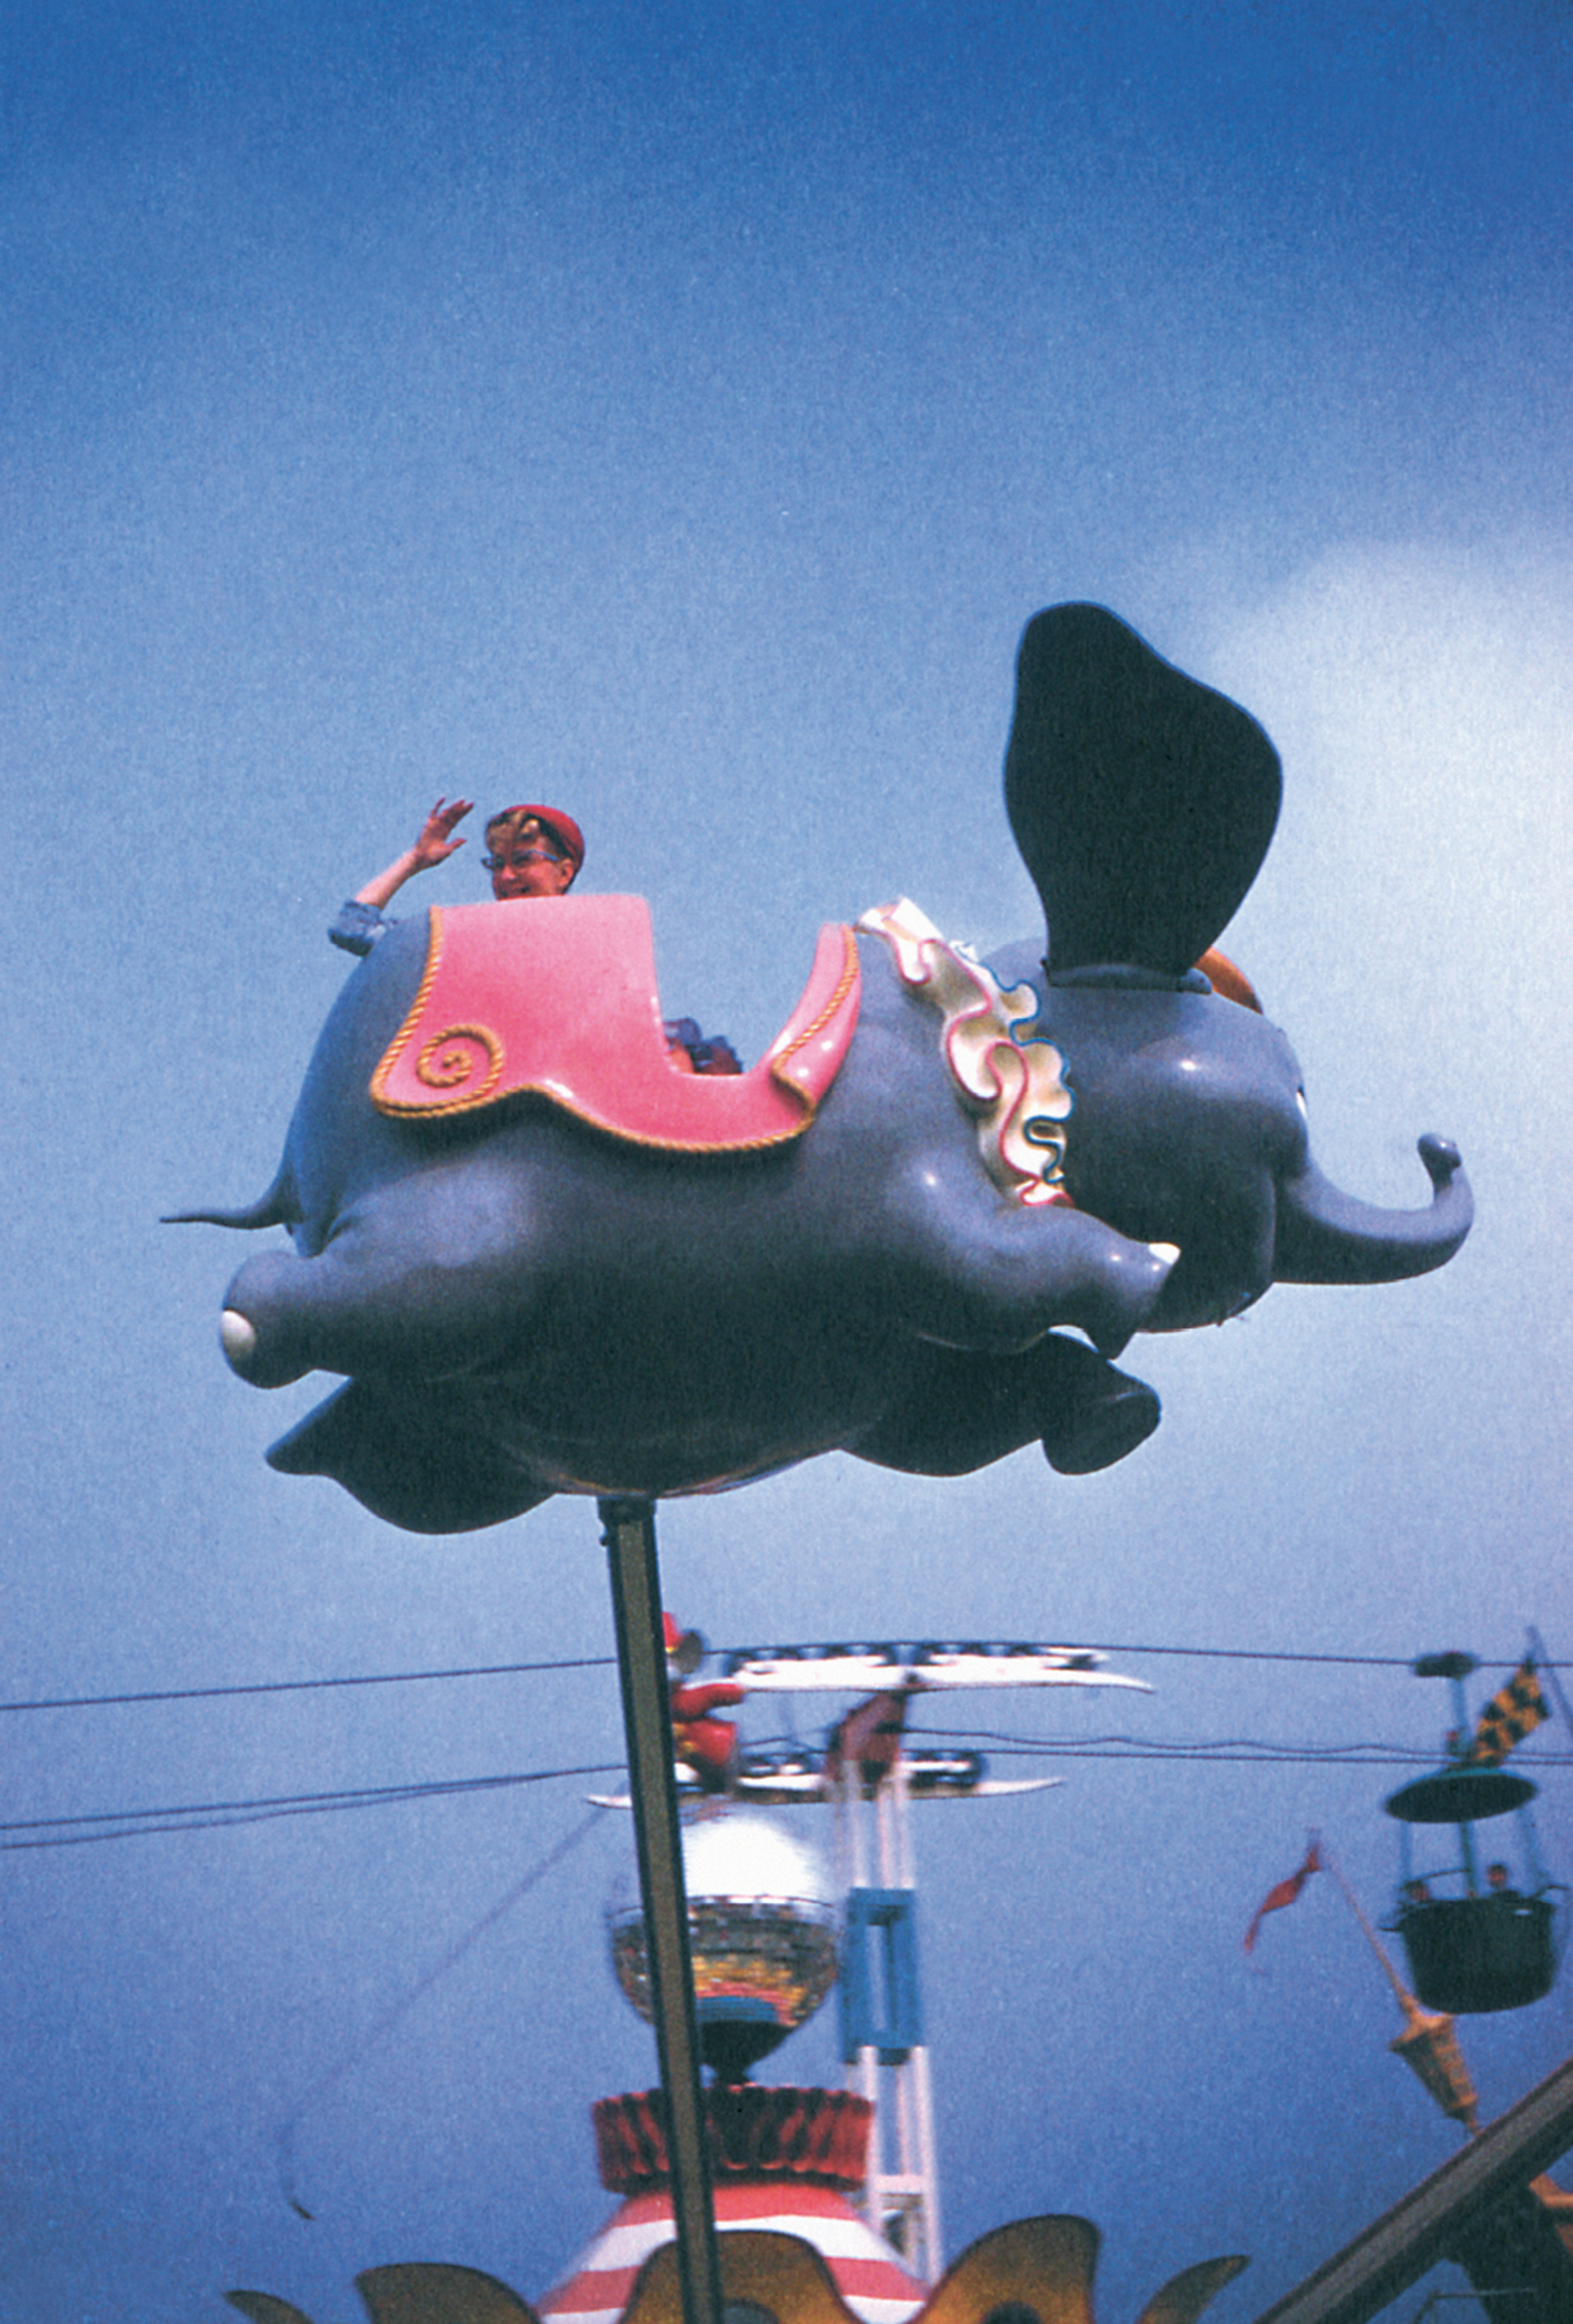 A photograph of a woman on a Dumbo ride at an amusement-park.